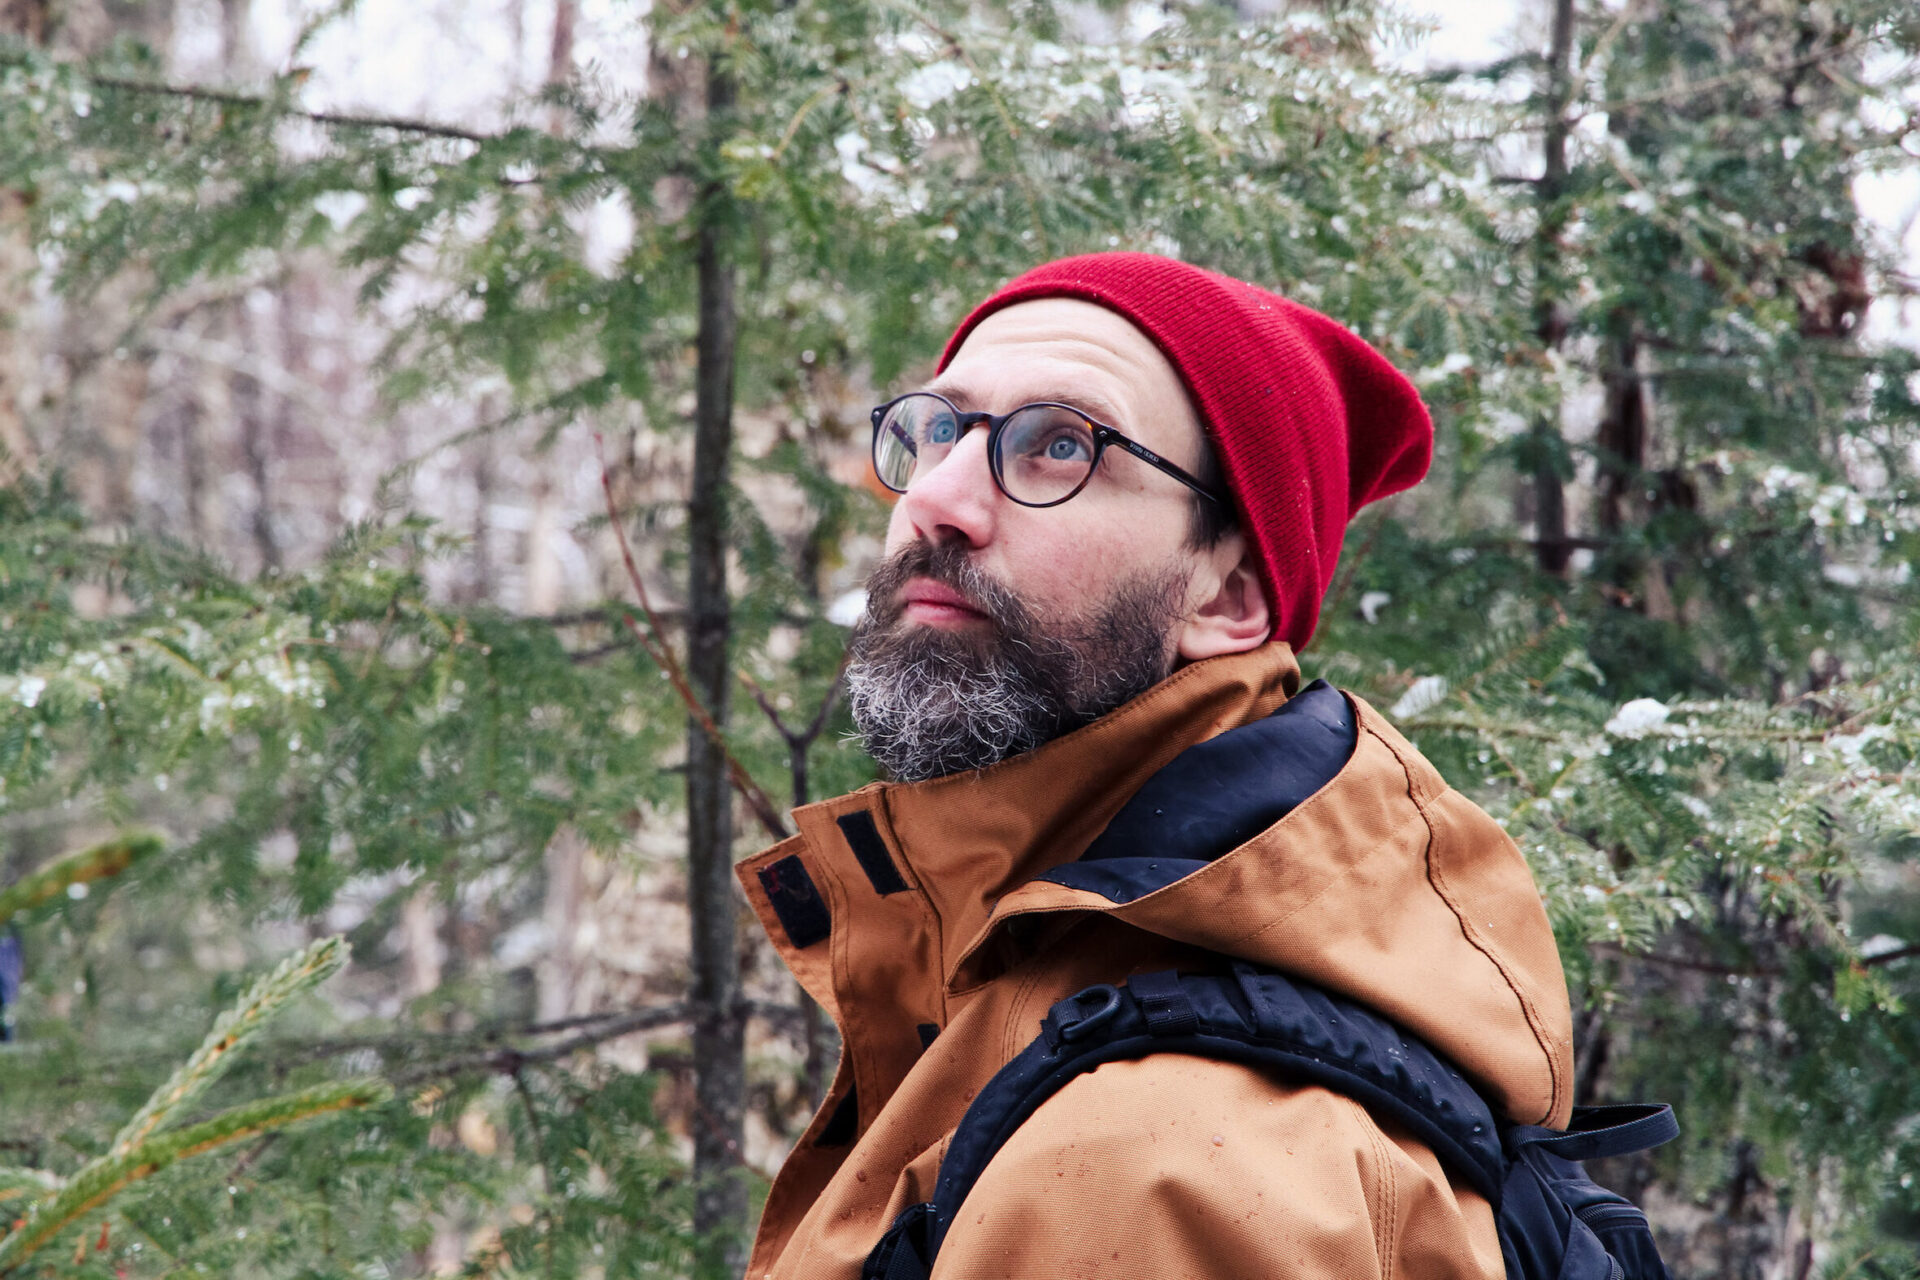 A man with round glasses and a red hat looks up at the forest canopy.